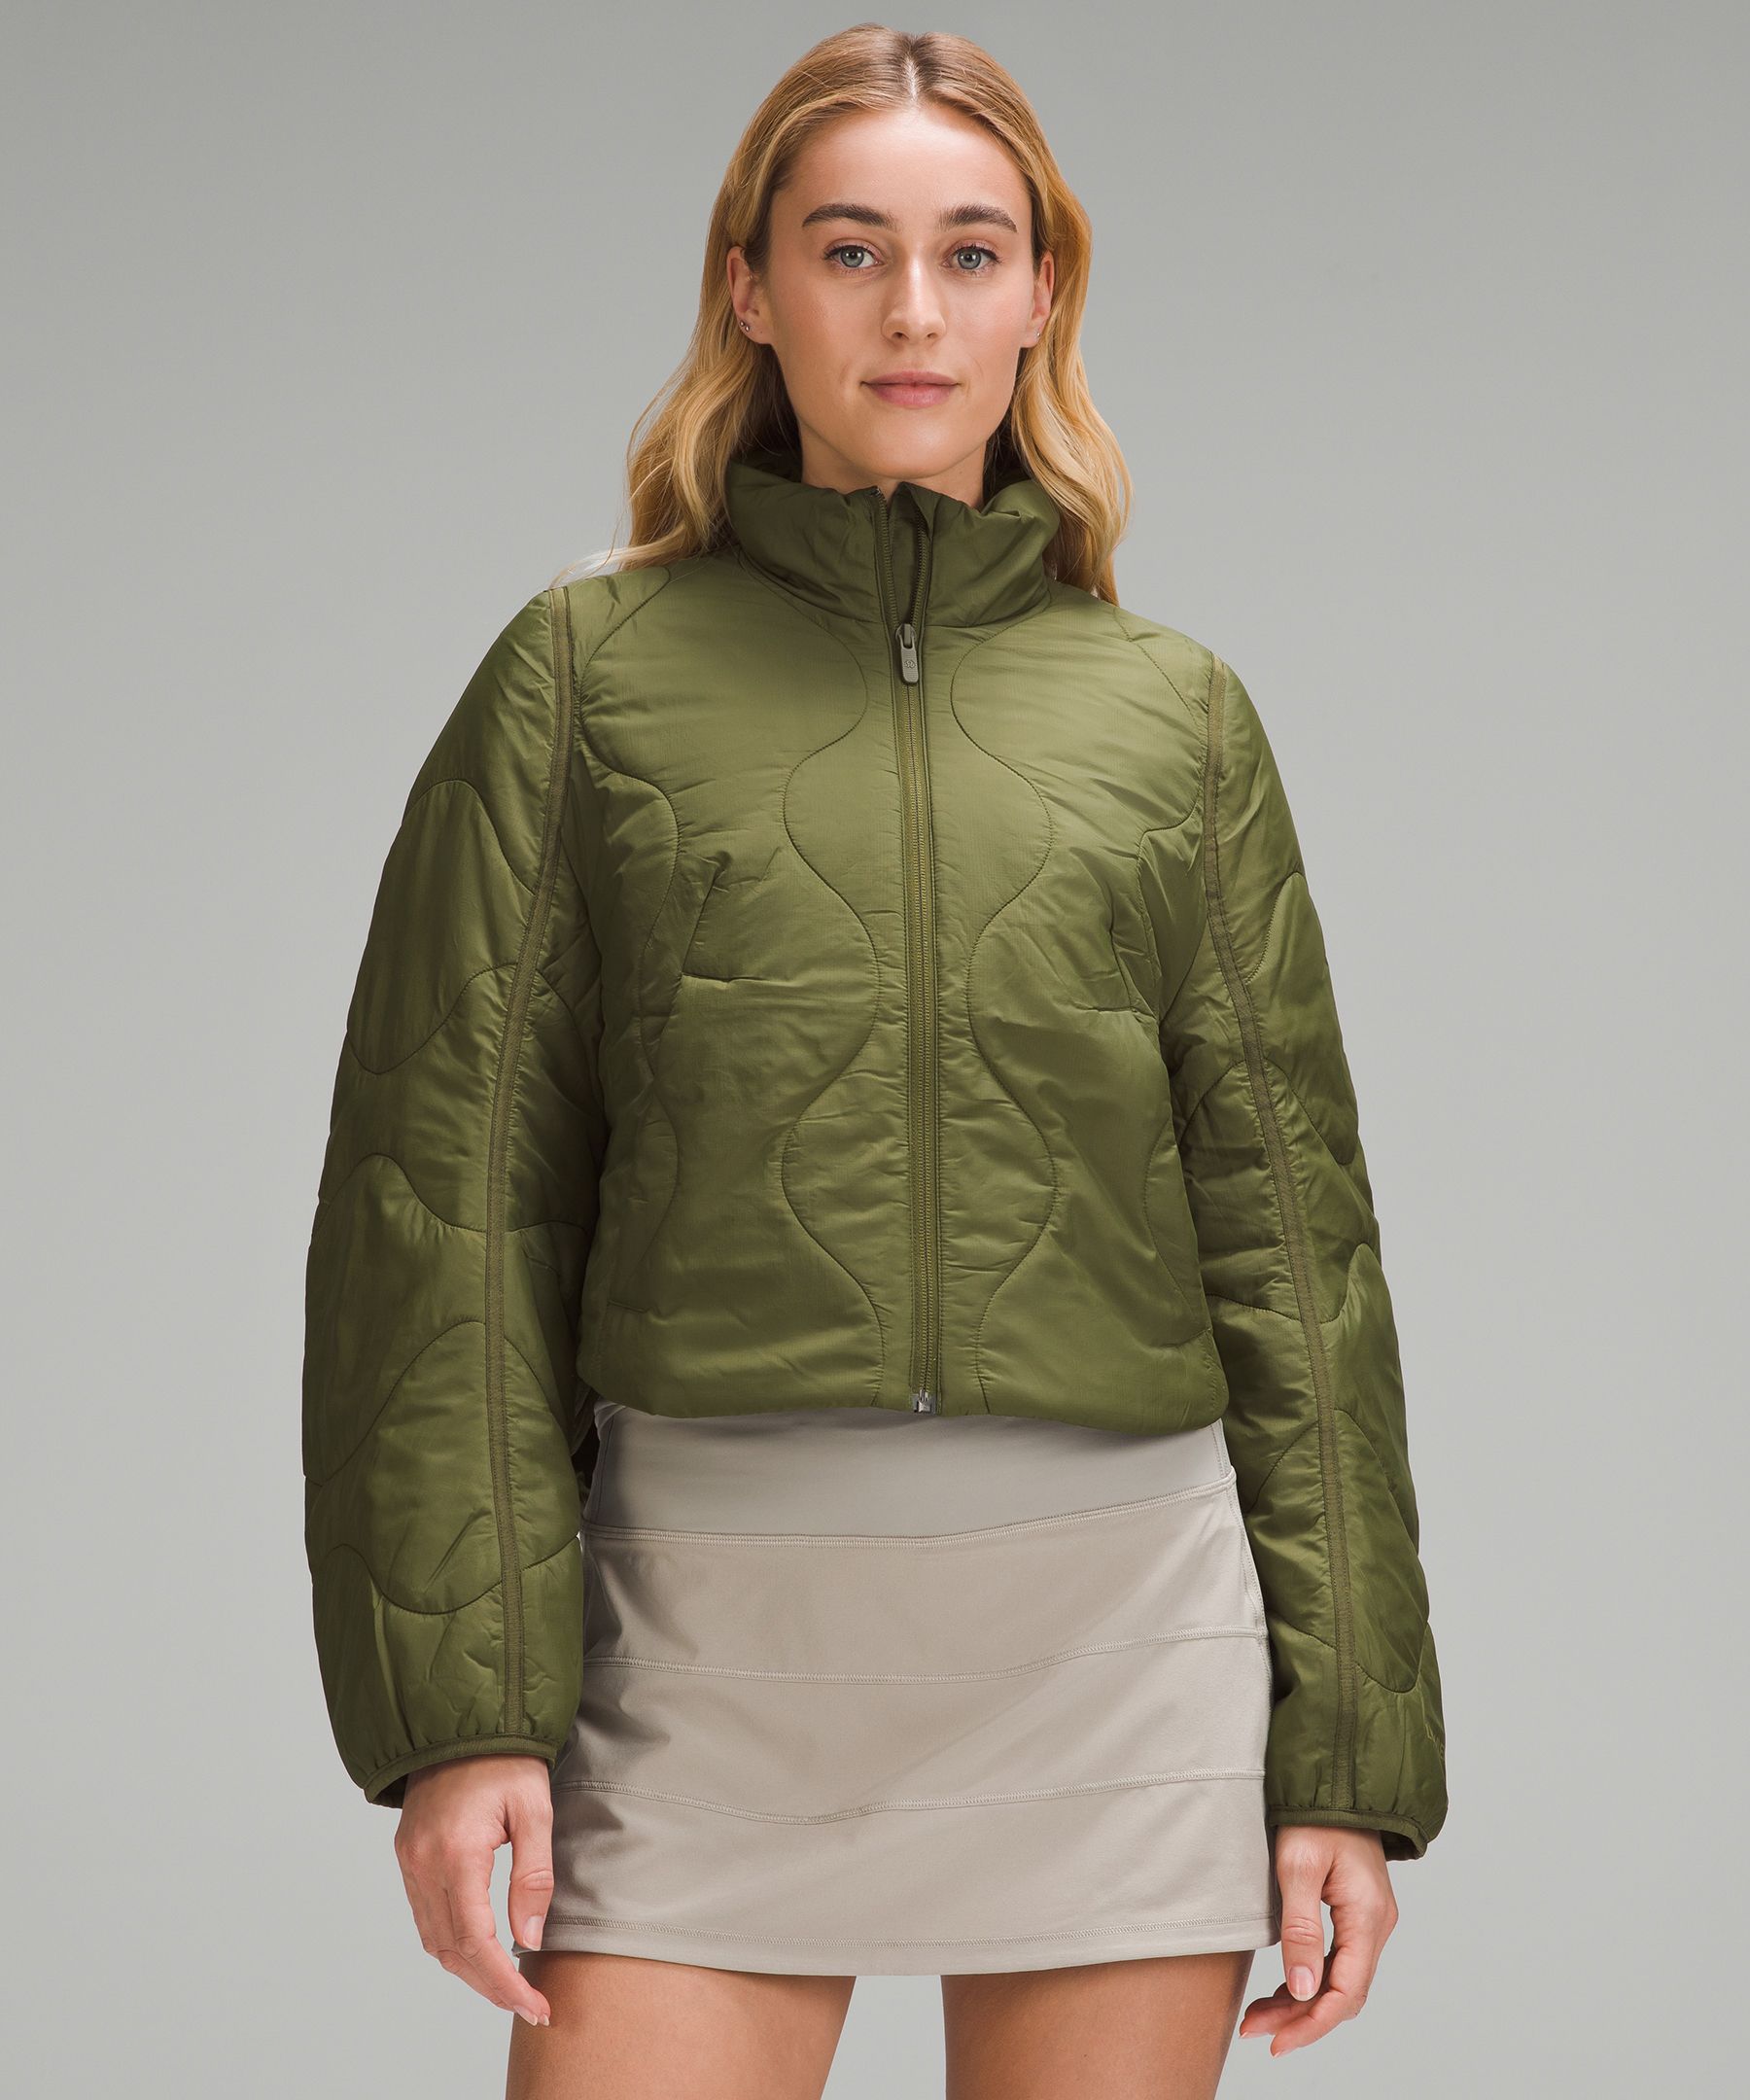 NWT lululemon quilted calm jacket~SIZE:6,8,10,12~BLACK&Army Green